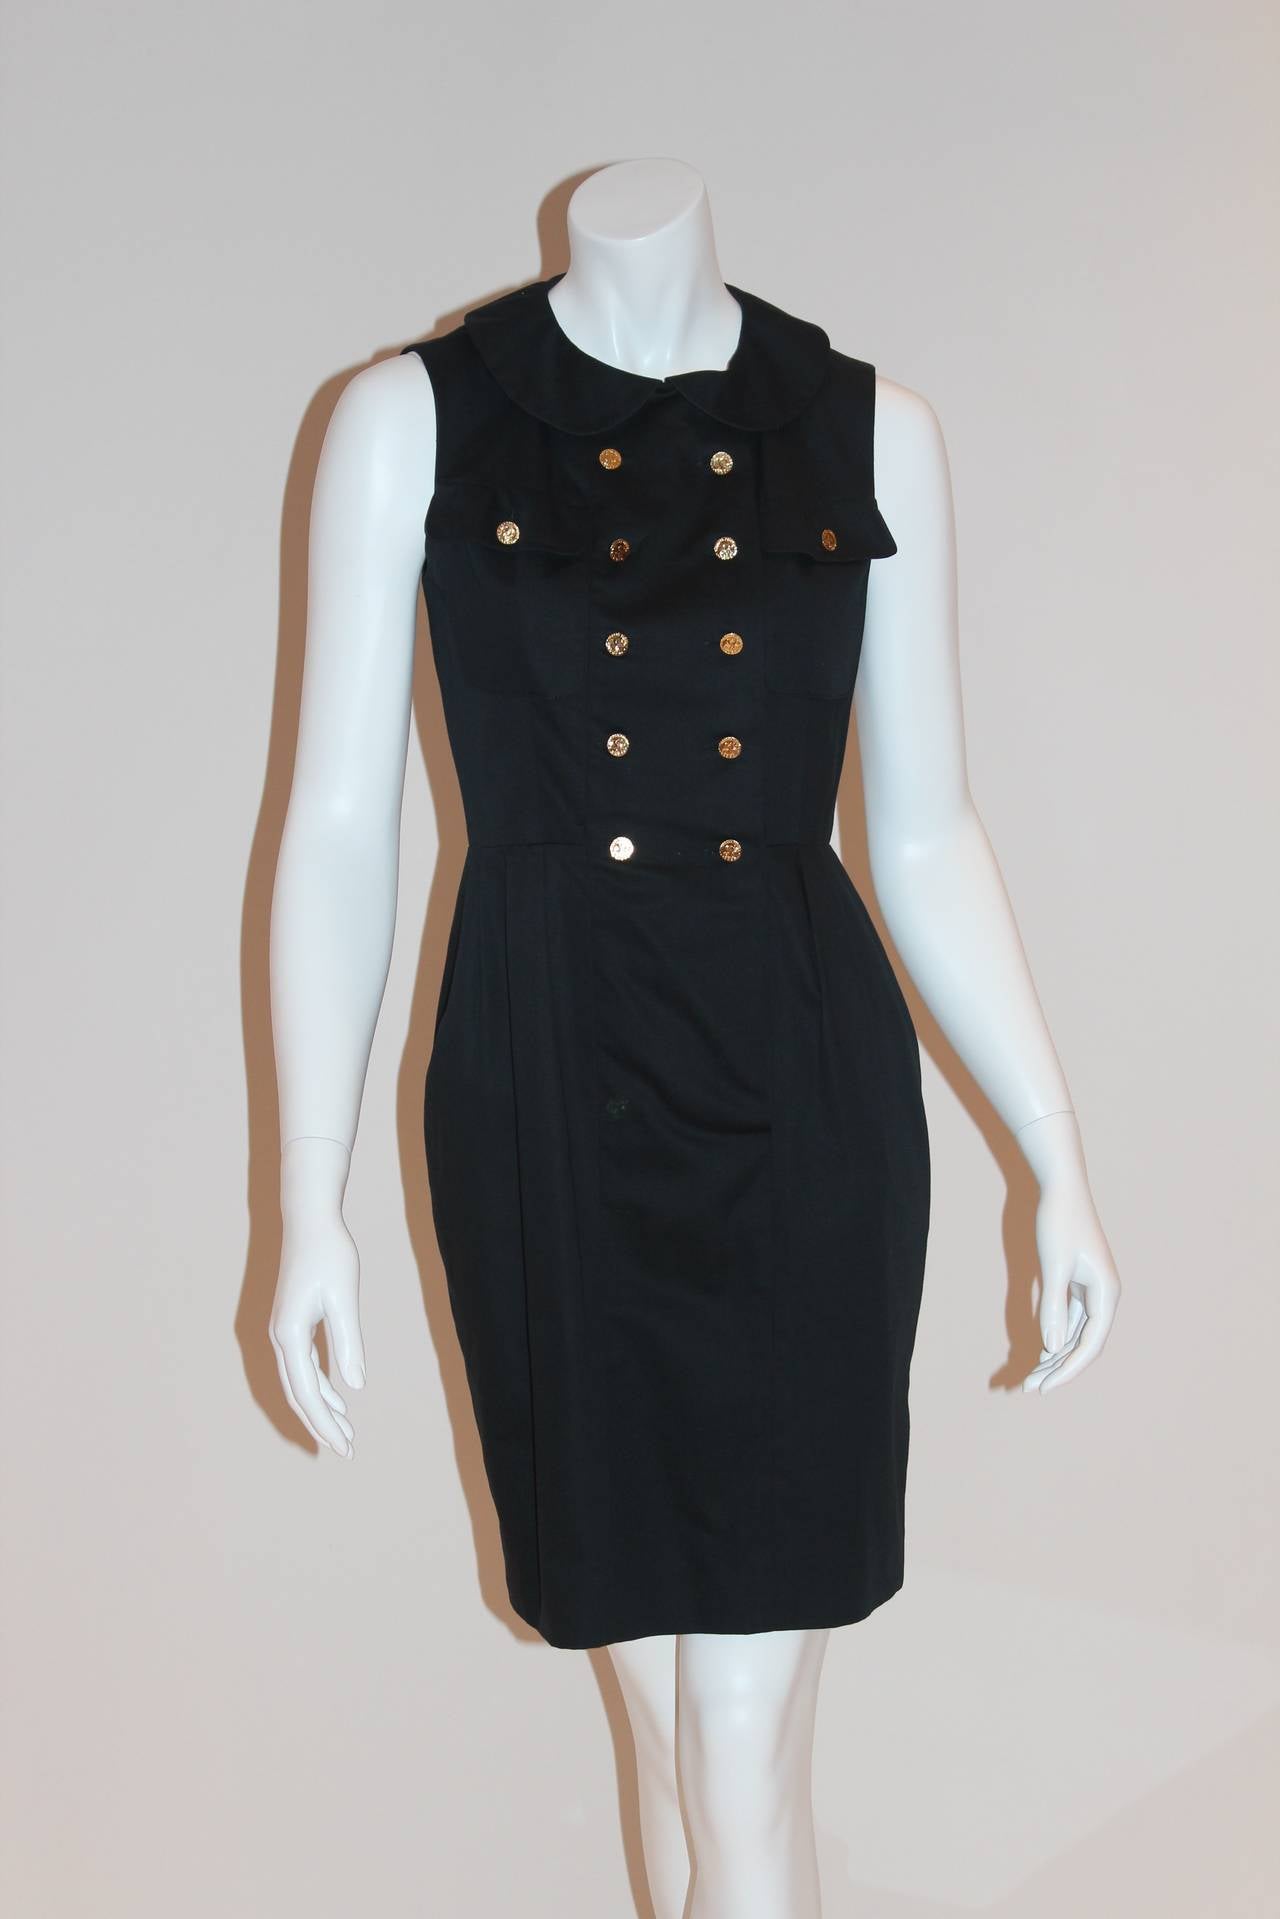 This knee-length navy dress is a classic piece for any casual occasion. Contains a Peter Pan collar, cinched waist, and subtle pleats. Additionally contains two breast pockets that are enclosed with a single gold-tone button. Five pairs of gold-tone